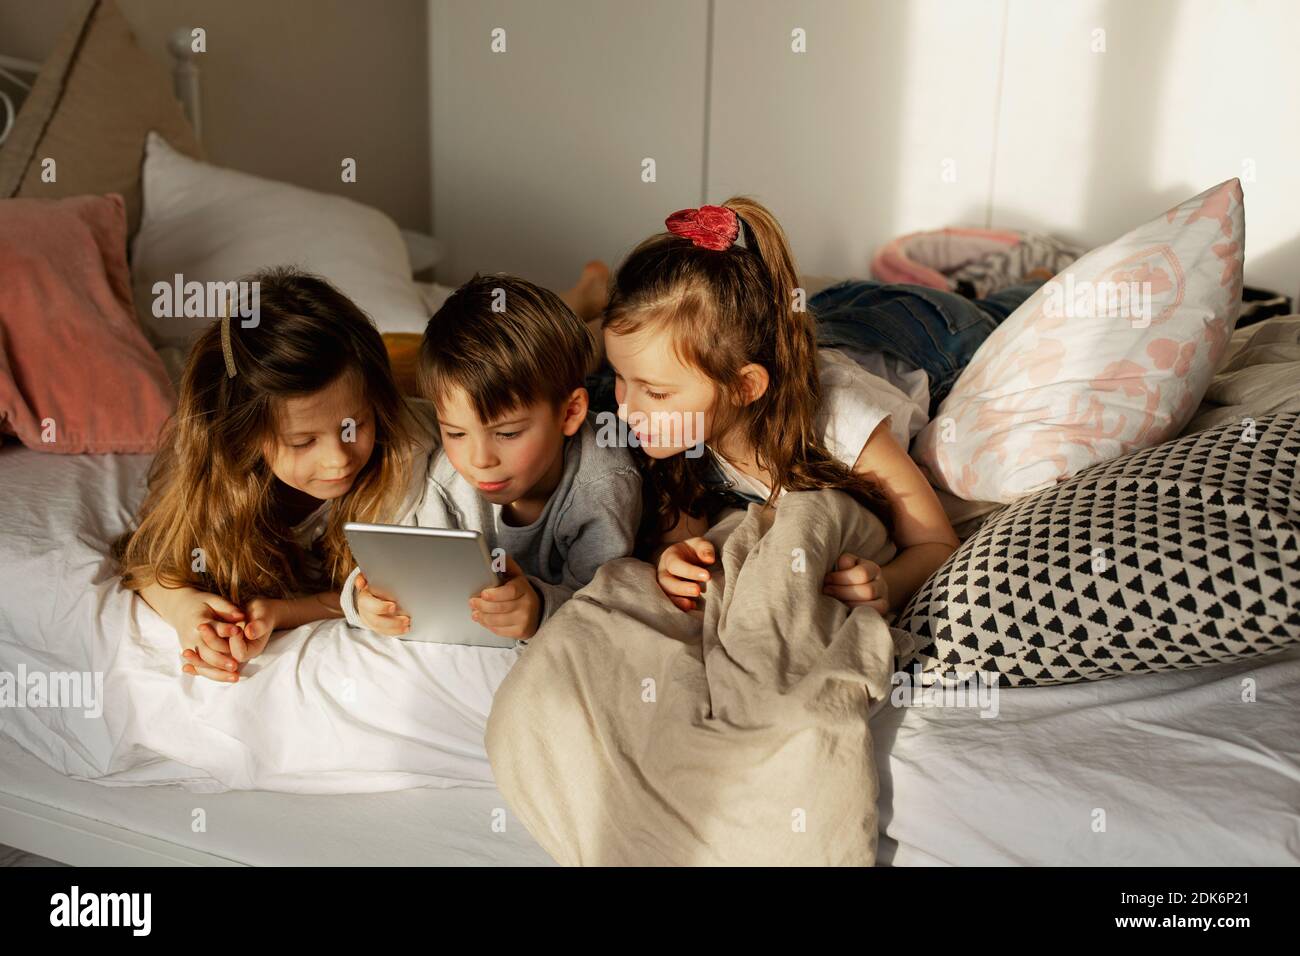 Children On Bed Using Digital Tablet Stock Photo Alamy